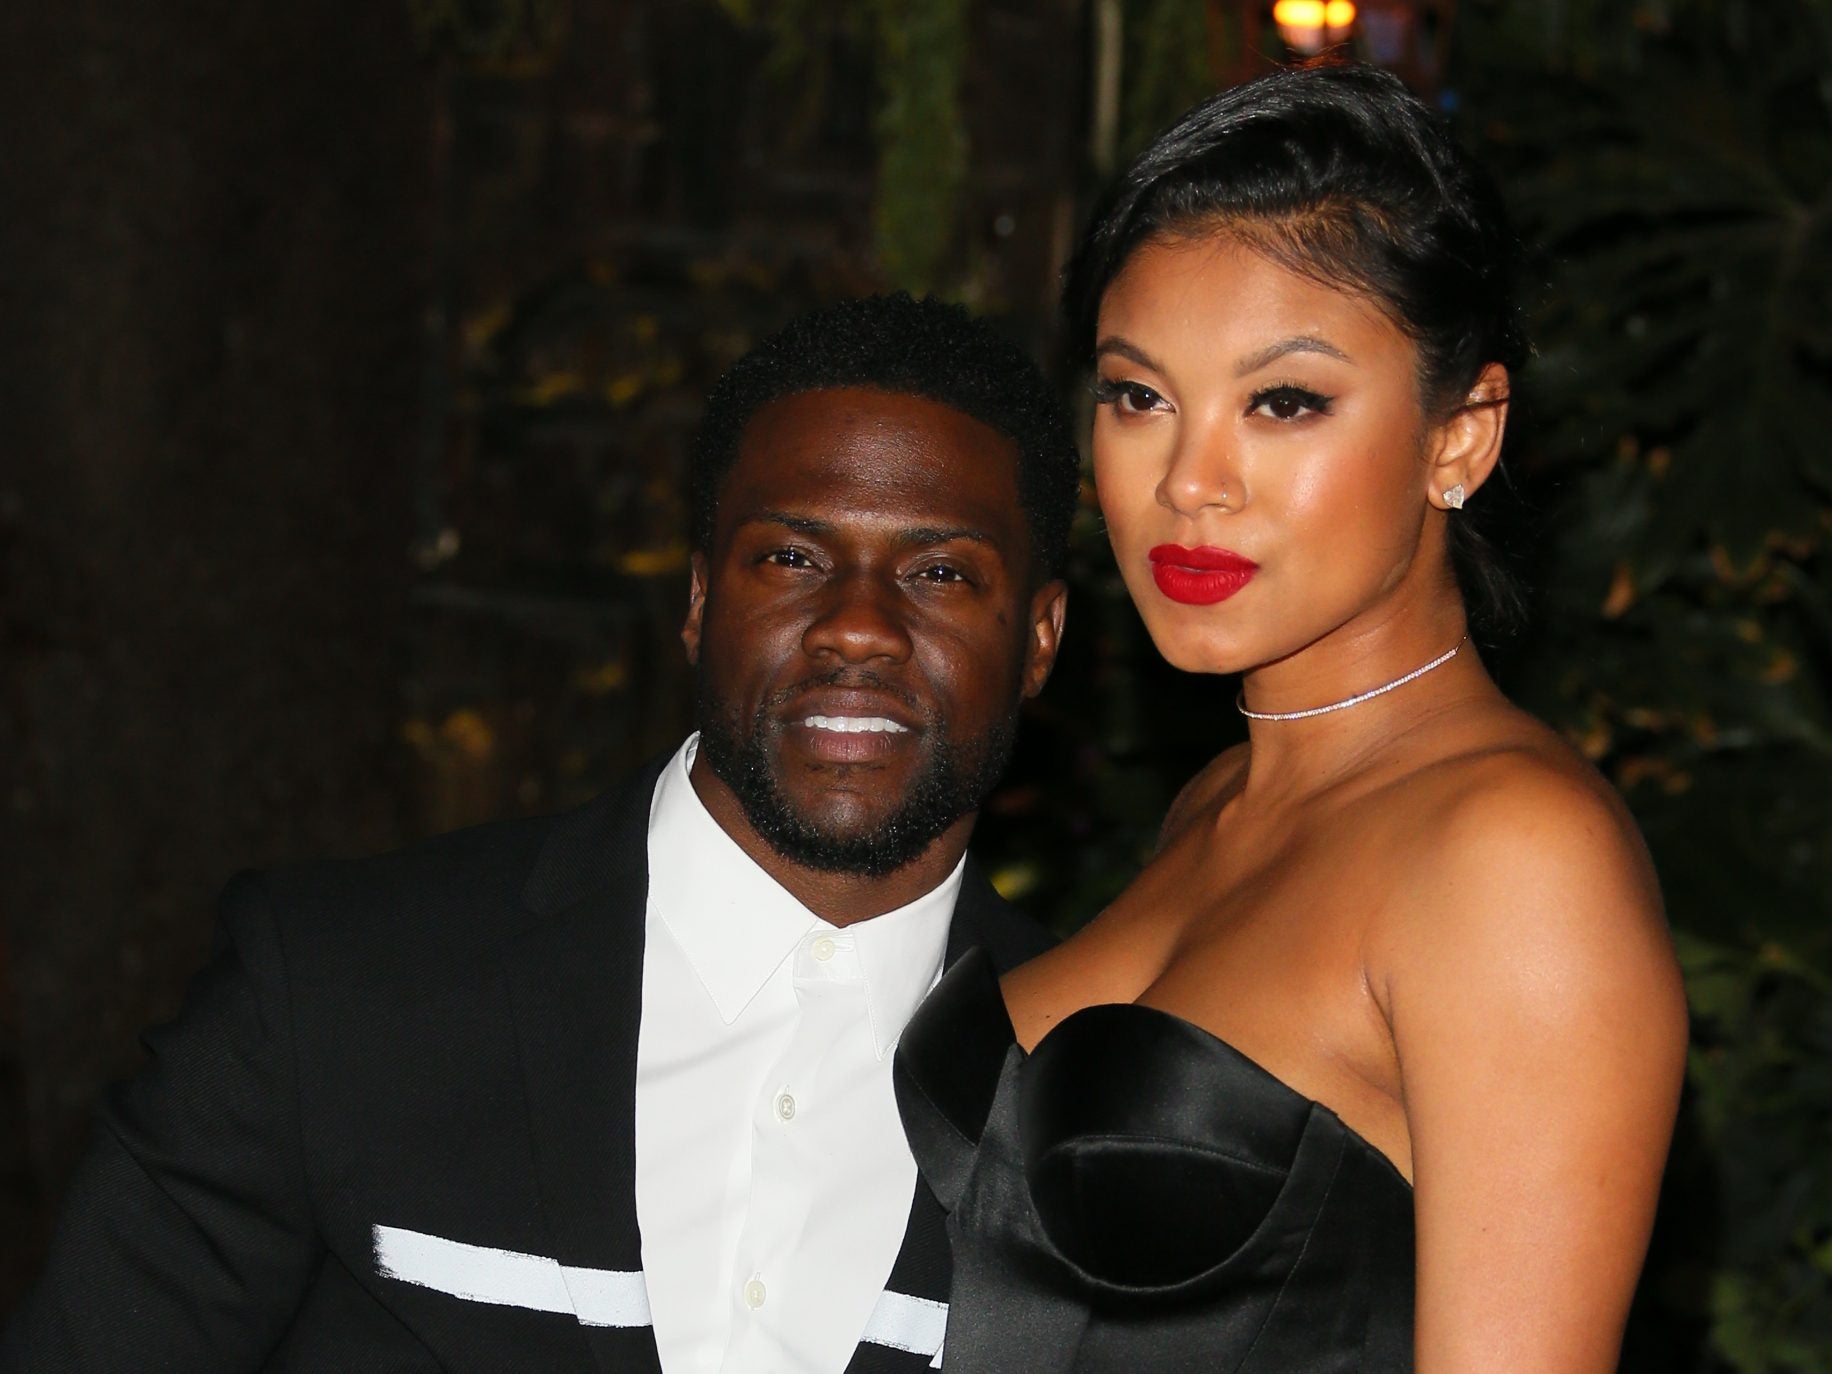 Kevin Harts Wife Eniko Found About His